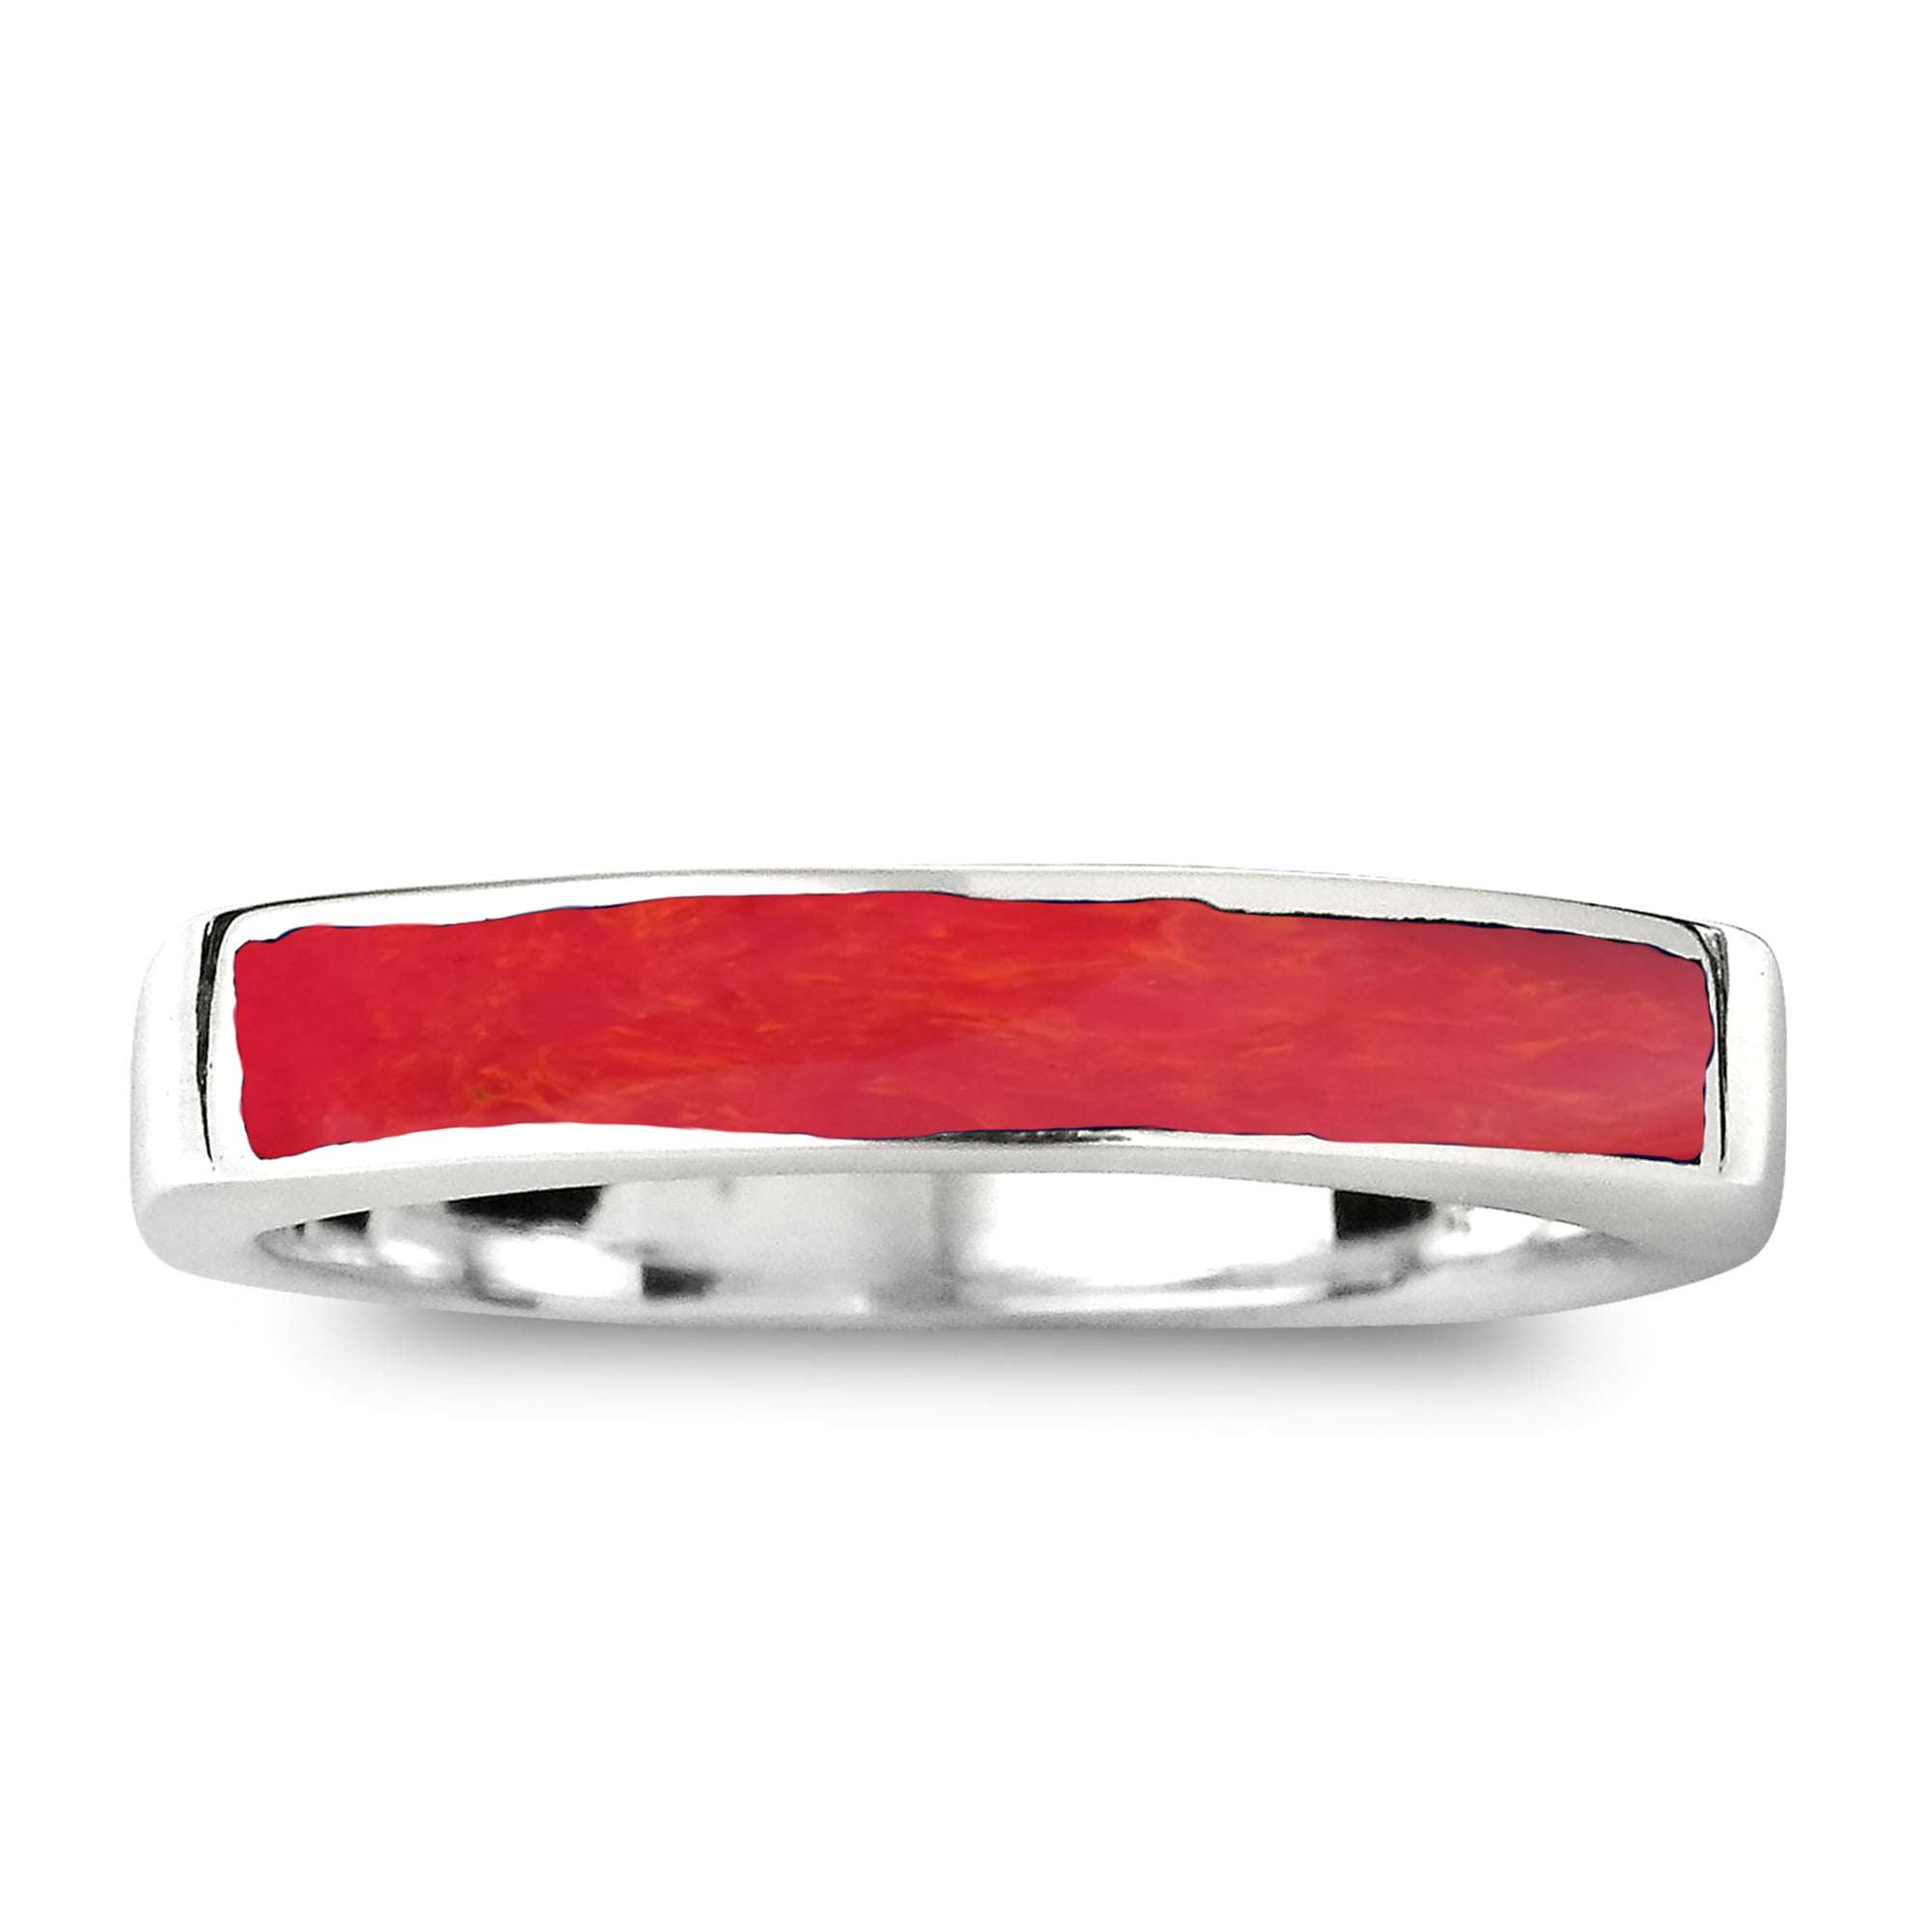 Solid Silver Ring 925 Silver Coral Rings Statement Rings,Birthstone Ring Cocktail Ring Handmade Ring Red Coral Ring Red Stone Ring